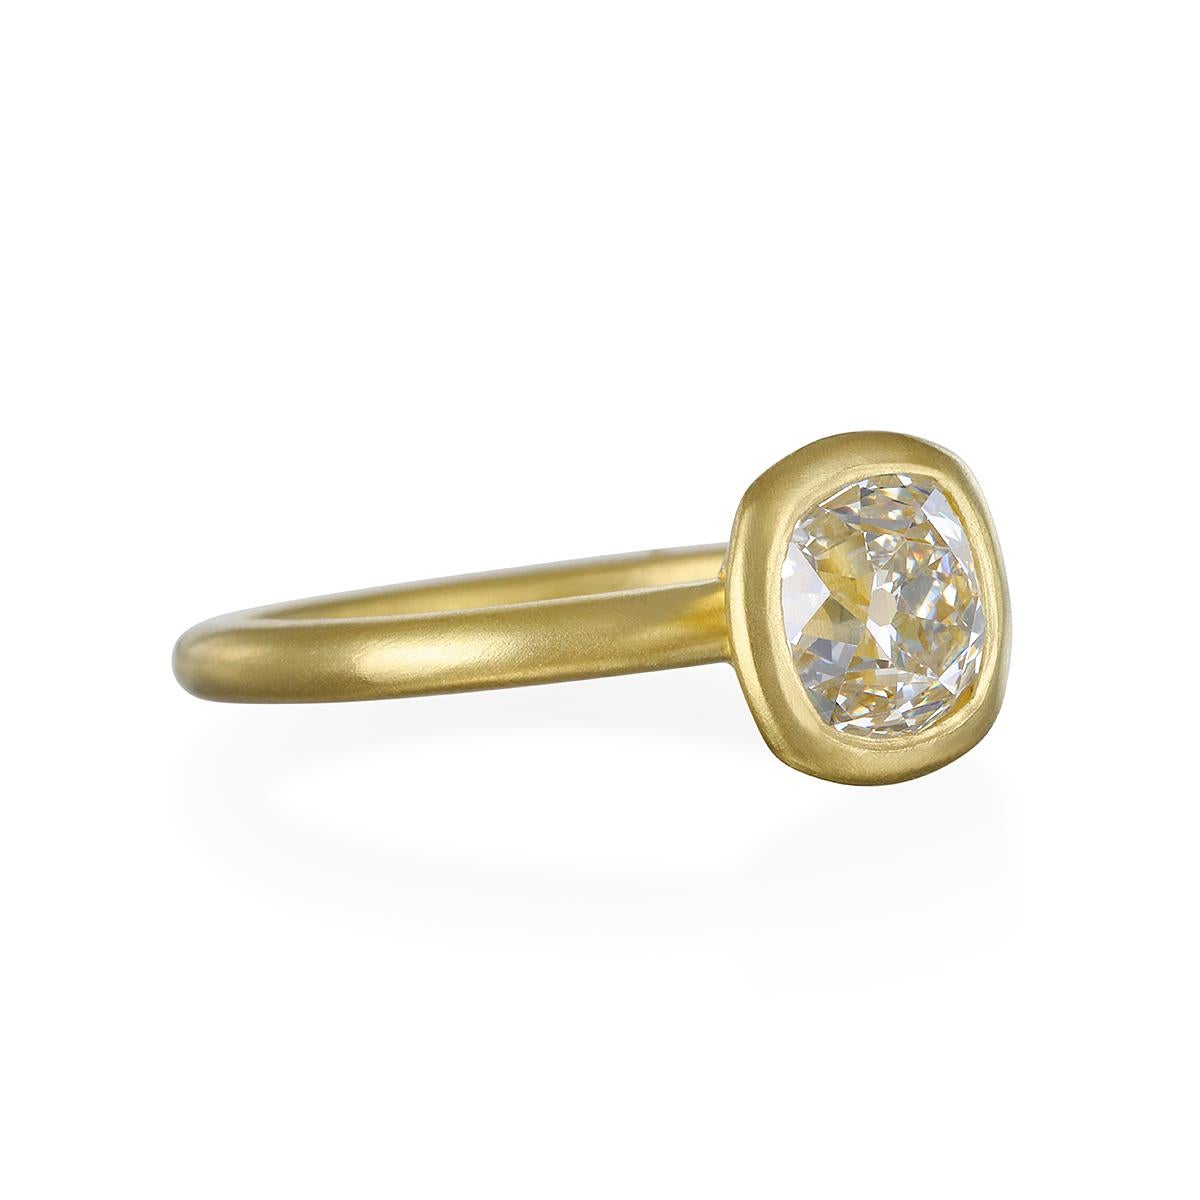 Faye Kim's Cushion Brilliant Cut Diamond Ring features an open bezel in 18 karat gold with a matte finish;
can be beautifully stacked and mixed and matched for a custom look.

Size 7.25  Ring can be sized.
Diamond: Cushion Cut 1.20 Carats 
Quality: